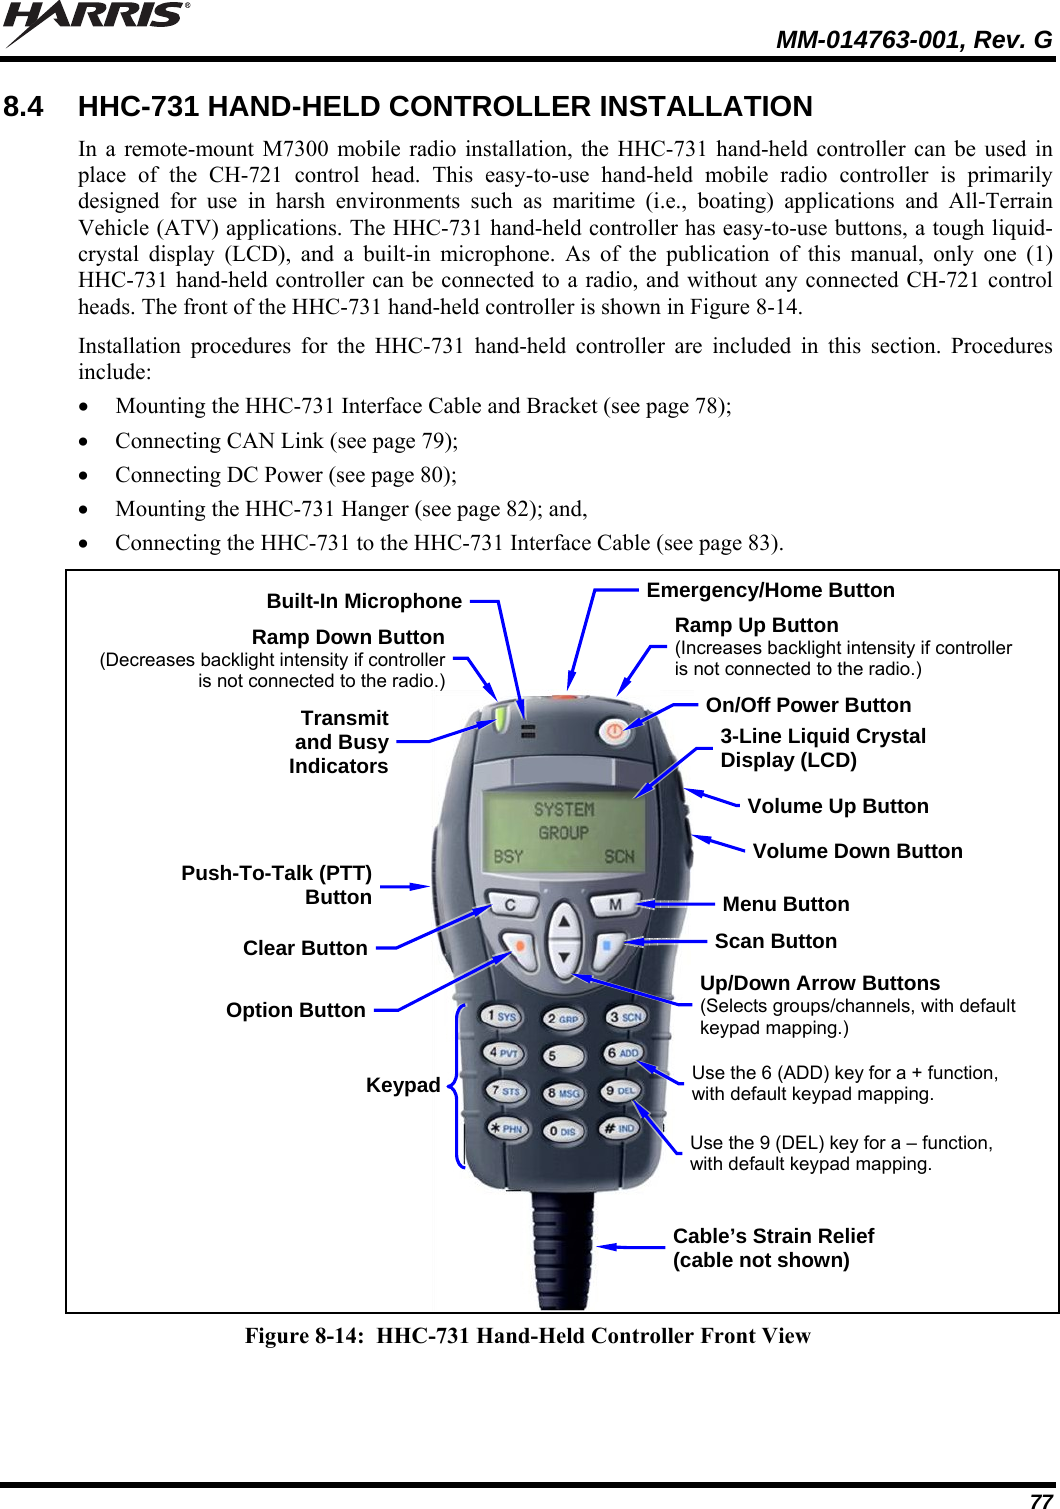   MM-014763-001, Rev. G 77 8.4  HHC-731 HAND-HELD CONTROLLER INSTALLATION In a remote-mount M7300 mobile radio installation, the HHC-731 hand-held controller can be used in place of the CH-721 control head. This easy-to-use hand-held mobile radio controller is primarily designed for use in harsh environments such as maritime (i.e., boating) applications and All-Terrain Vehicle (ATV) applications. The HHC-731 hand-held controller has easy-to-use buttons, a tough liquid-crystal display (LCD), and a built-in microphone. As of the publication of this manual, only one (1) HHC-731 hand-held controller can be connected to a radio, and without any connected CH-721 control heads. The front of the HHC-731 hand-held controller is shown in Figure 8-14. Installation procedures for the HHC-731 hand-held controller are included in this section. Procedures include:  Mounting the HHC-731 Interface Cable and Bracket (see page 78);  Connecting CAN Link (see page 79);  Connecting DC Power (see page 80);  Mounting the HHC-731 Hanger (see page 82); and,  Connecting the HHC-731 to the HHC-731 Interface Cable (see page 83).  Figure 8-14:  HHC-731 Hand-Held Controller Front View 3-Line Liquid Crystal Display (LCD) Built-In MicrophonePush-To-Talk (PTT)ButtonUp/Down Arrow Buttons (Selects groups/channels, with default keypad mapping.) Transmit and Busy IndicatorsMenu Button Volume Down Button Emergency/Home ButtonCable’s Strain Relief (cable not shown) On/Off Power Button Clear ButtonOption ButtonScan Button Ramp Down Button(Decreases backlight intensity if controller is not connected to the radio.)Volume Up Button KeypadRamp Up Button (Increases backlight intensity if controller is not connected to the radio.)Use the 6 (ADD) key for a + function, with default keypad mapping. Use the 9 (DEL) key for a – function, with default keypad mapping.